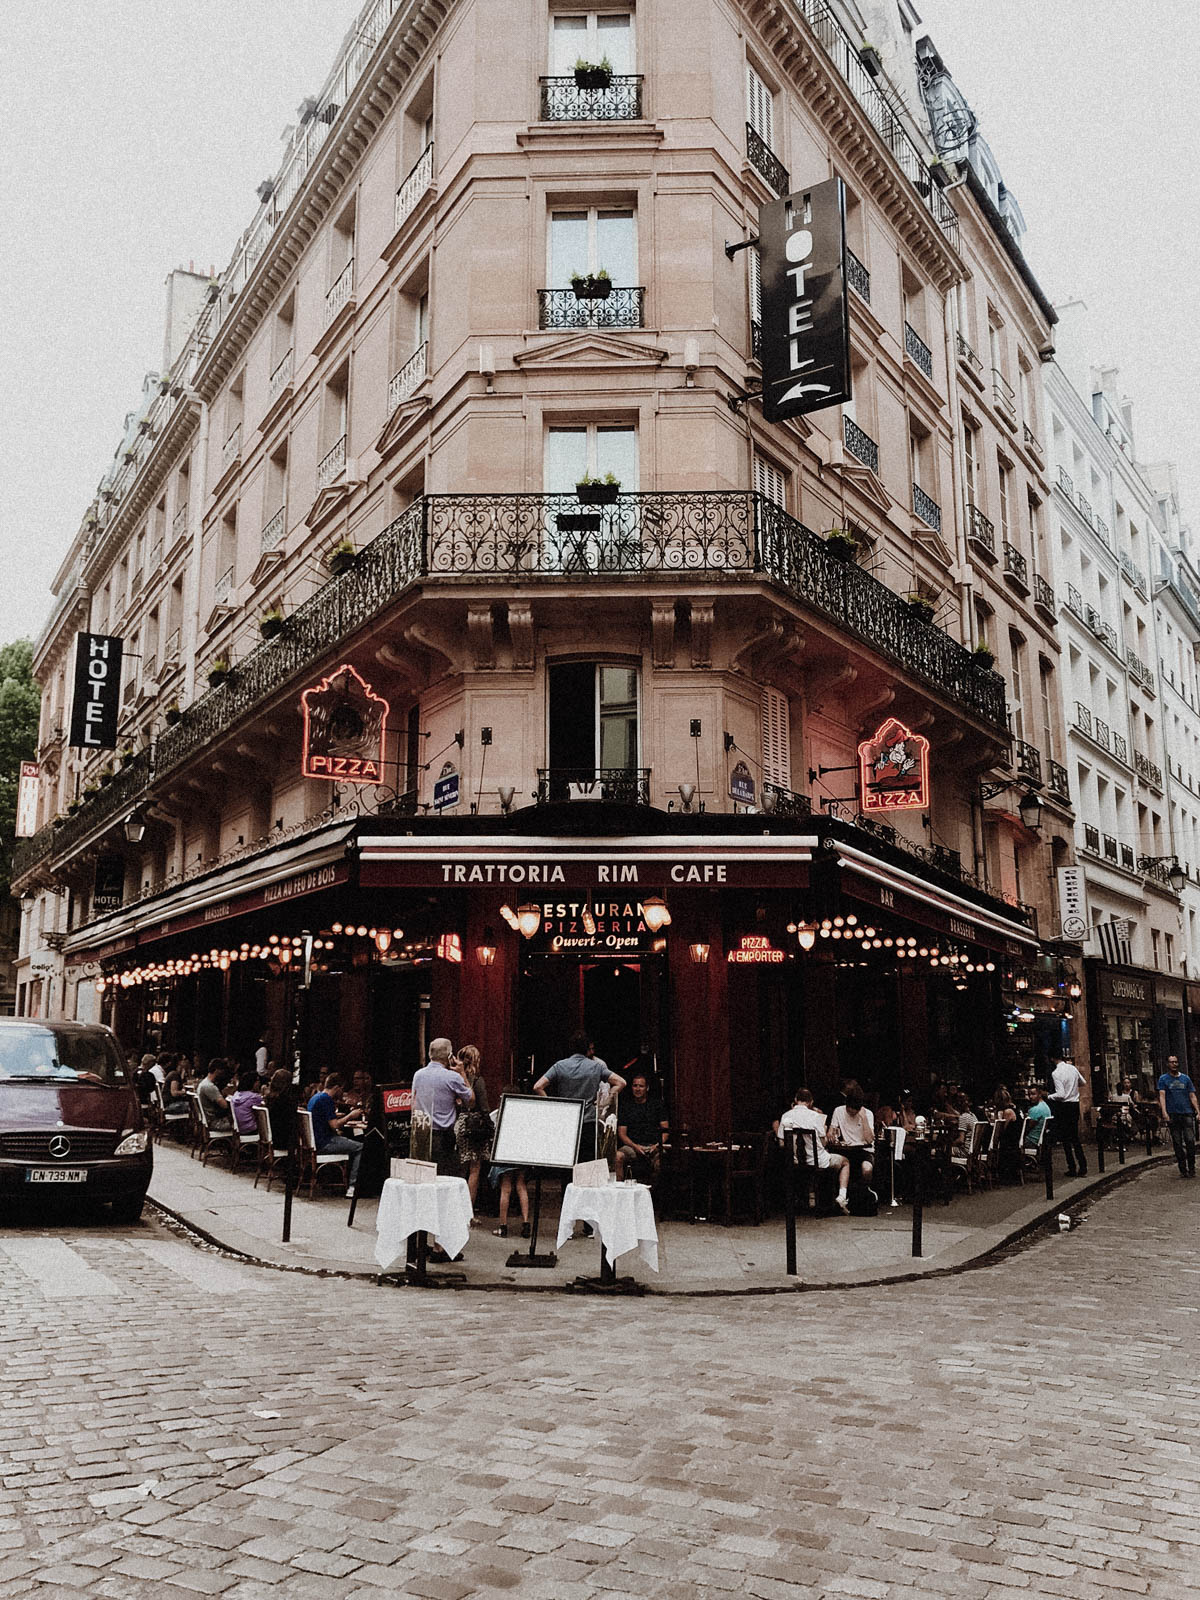 Paris France Travel Guide - Cafe Trattoria Rim, European Architecture and Buildings / RG Daily Blog